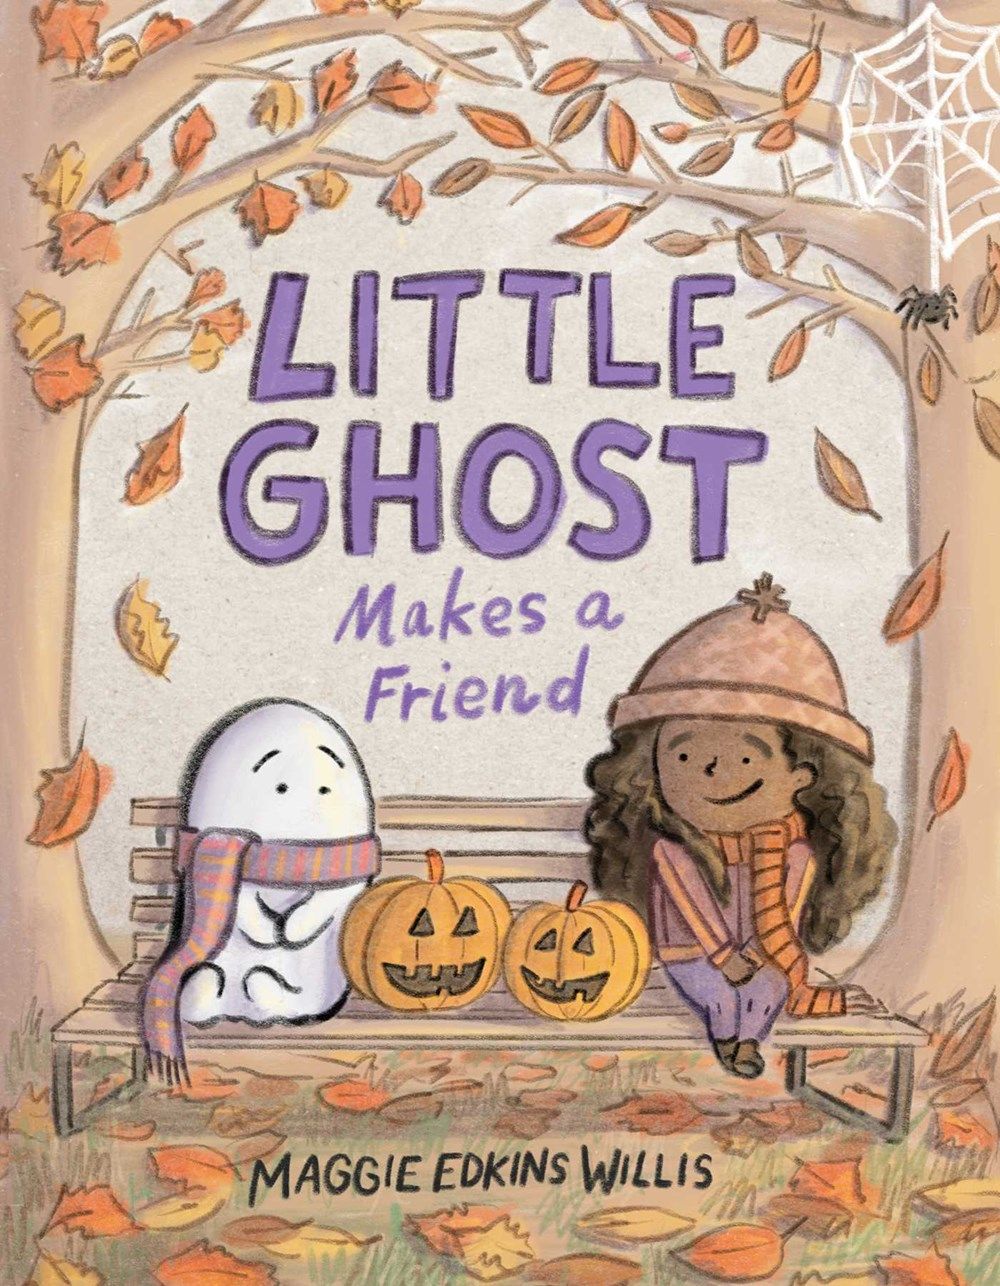 Cover of Little Ghost Makes a Friend by Maggie Edkins Willis